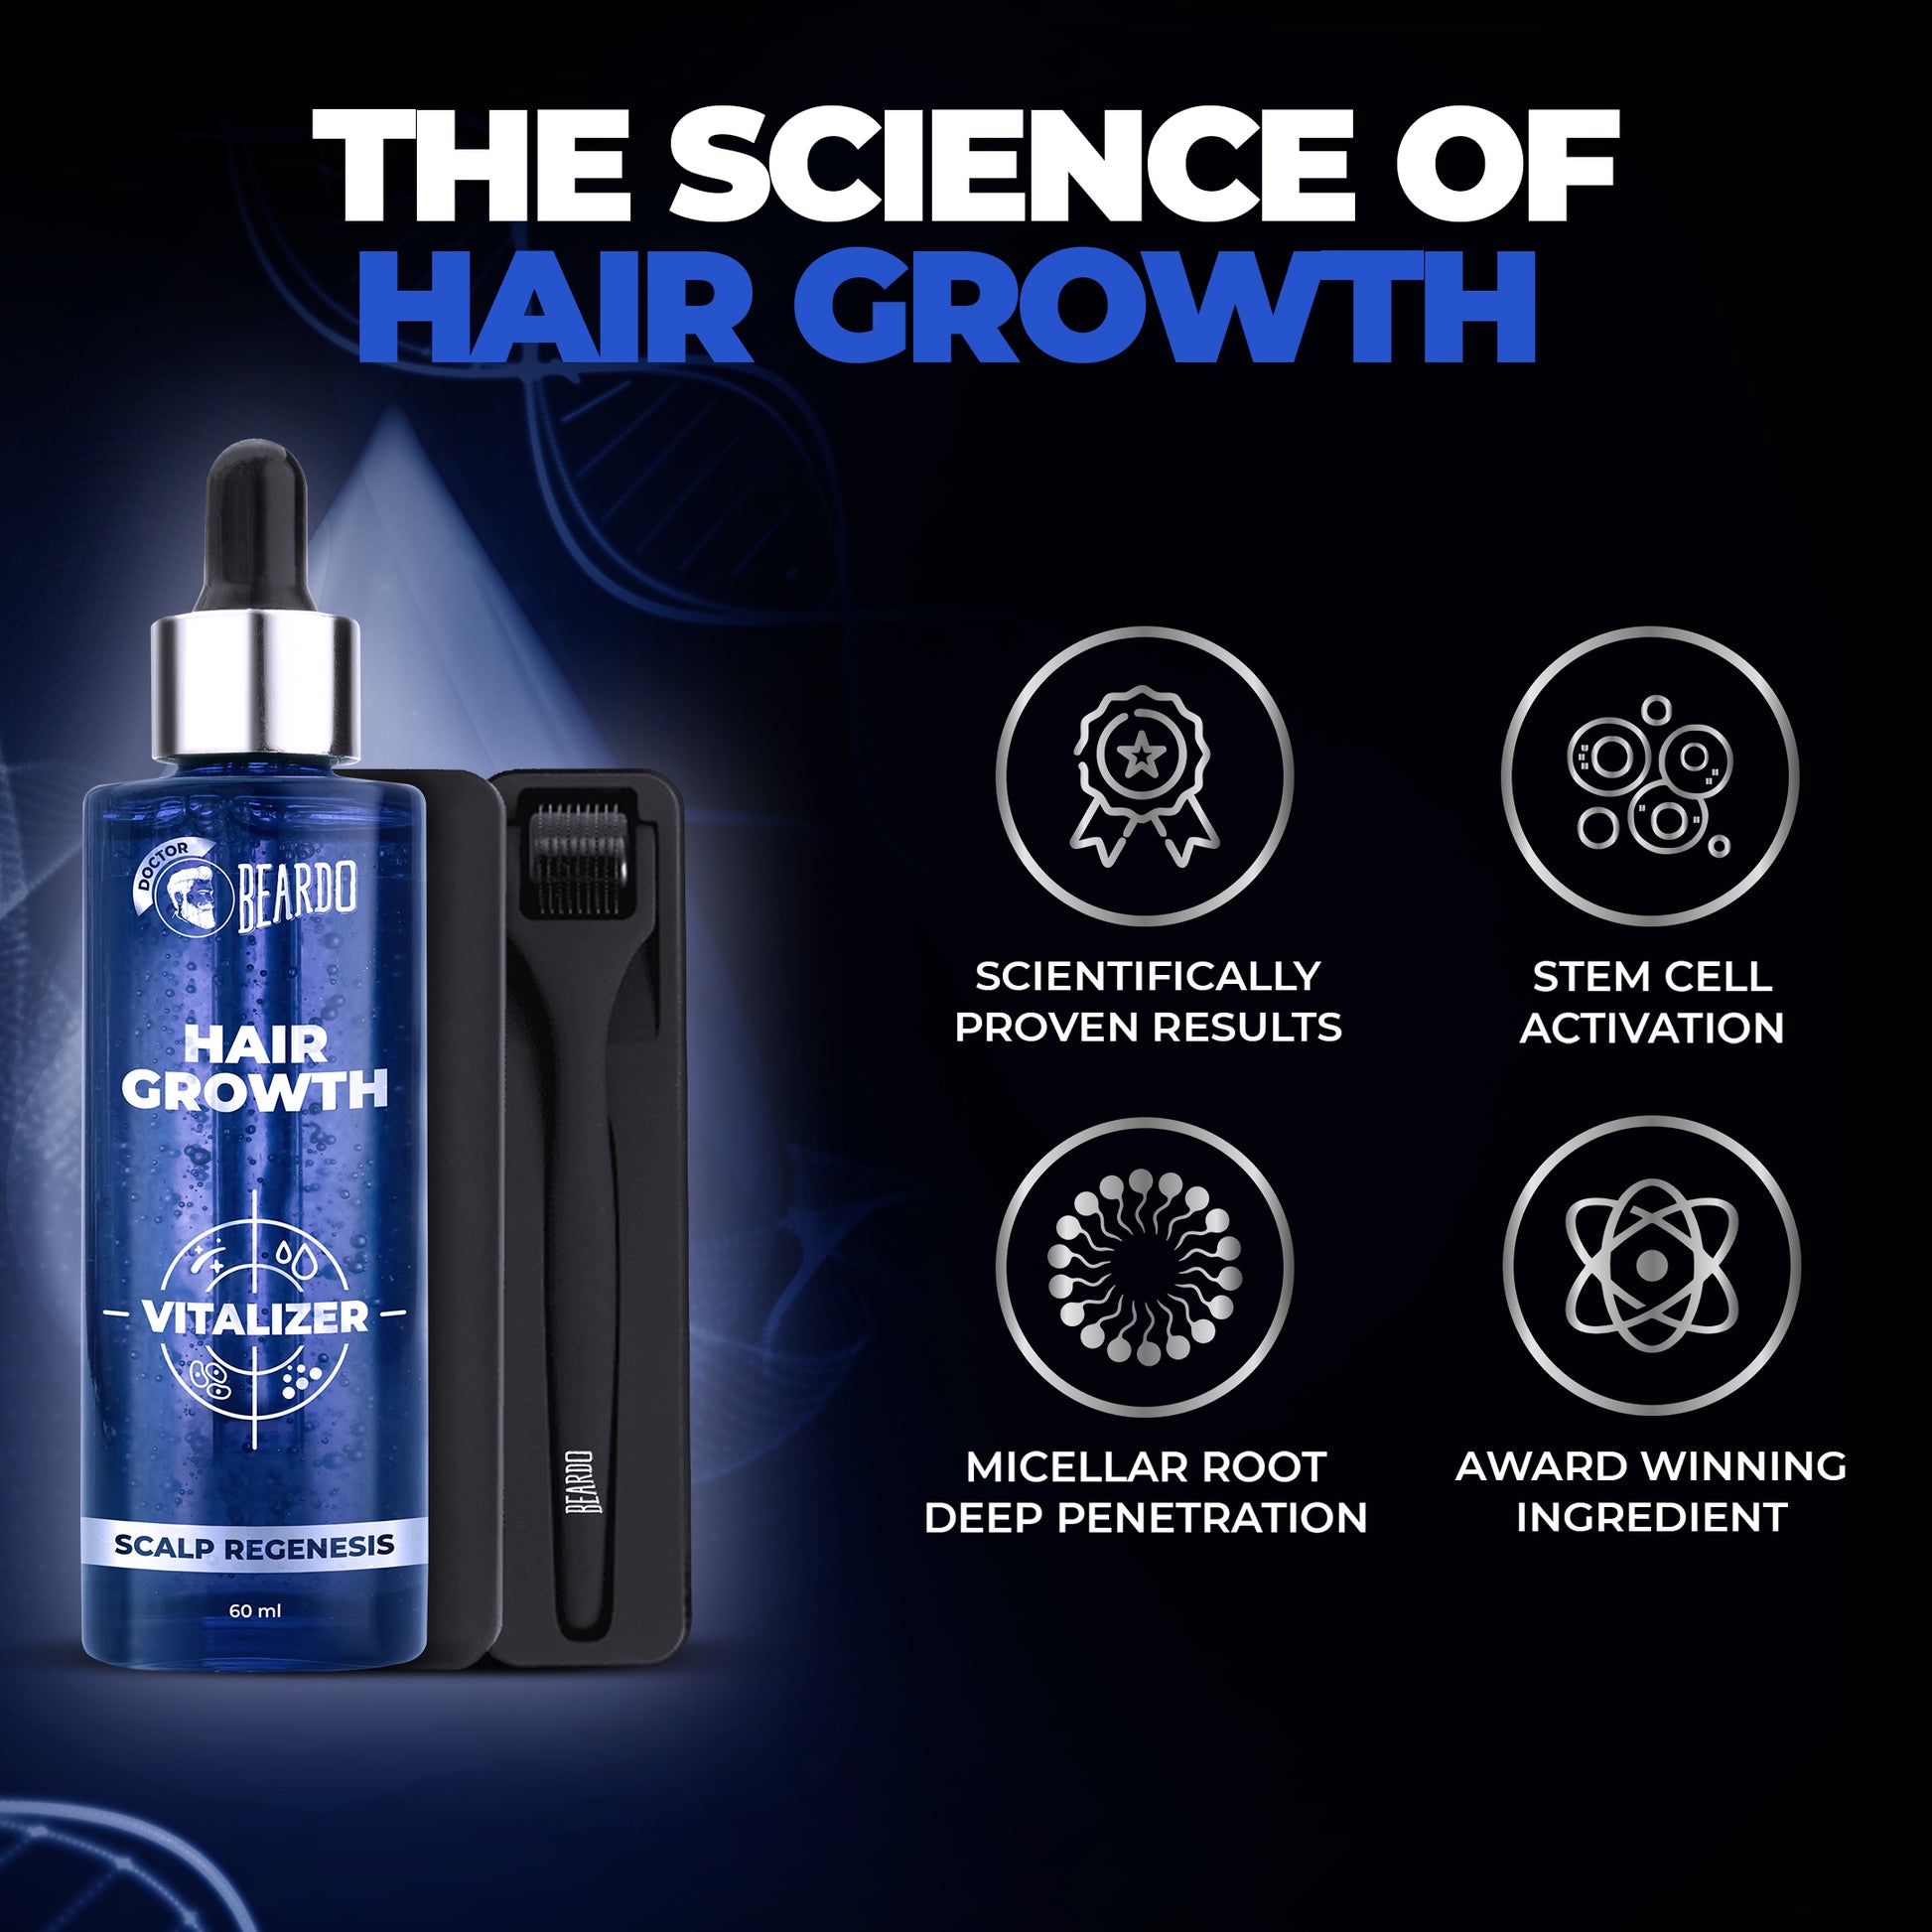 stem cell activation, micellar root deep penetration, science of hair growth, Is Beardo good for hair growth?, Is Beardo good for hair fall?, Does beard growth kit work?, Which beard growth kit is best?